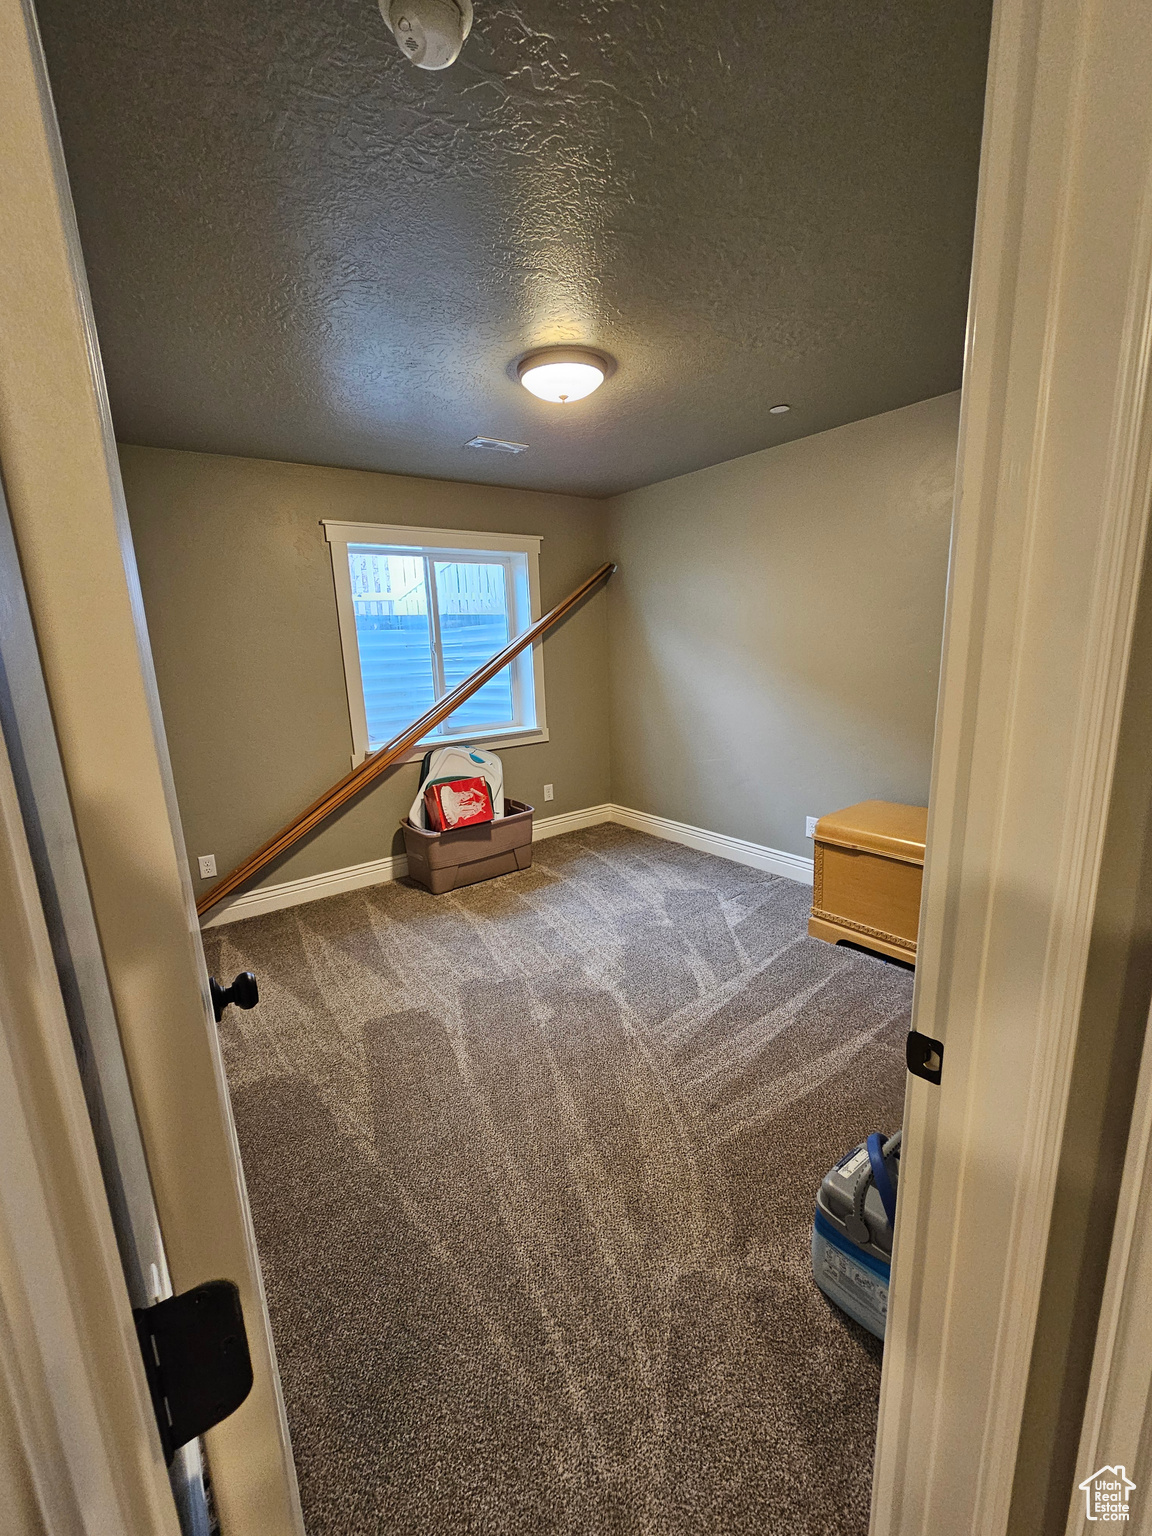 Interior space featuring carpet flooring and a textured ceiling